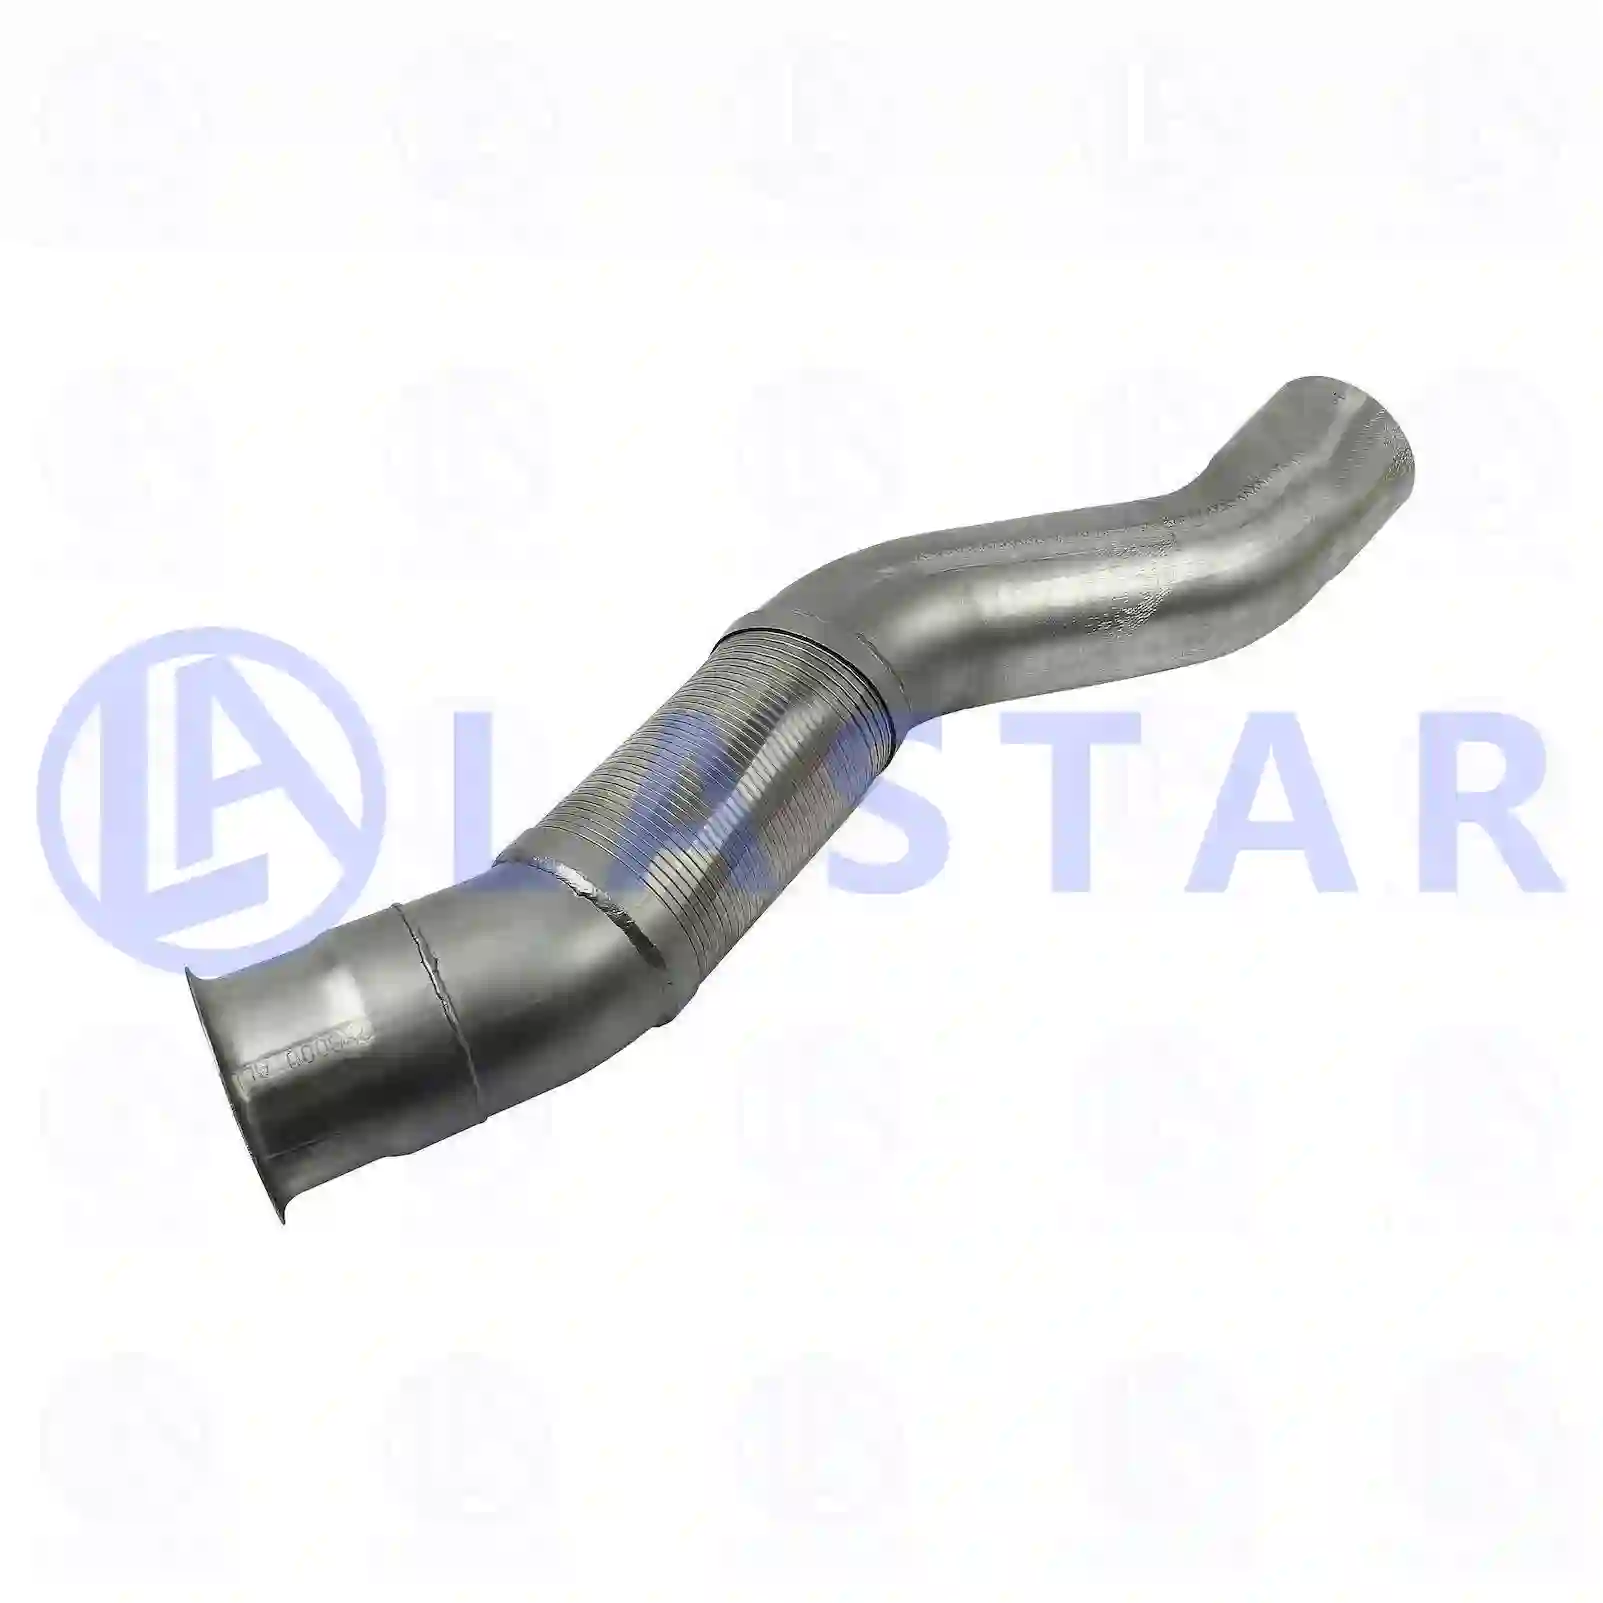 Exhaust pipe, 77706323, 9424902319, 9424903119, 9424904219, ZG10301-0008 ||  77706323 Lastar Spare Part | Truck Spare Parts, Auotomotive Spare Parts Exhaust pipe, 77706323, 9424902319, 9424903119, 9424904219, ZG10301-0008 ||  77706323 Lastar Spare Part | Truck Spare Parts, Auotomotive Spare Parts